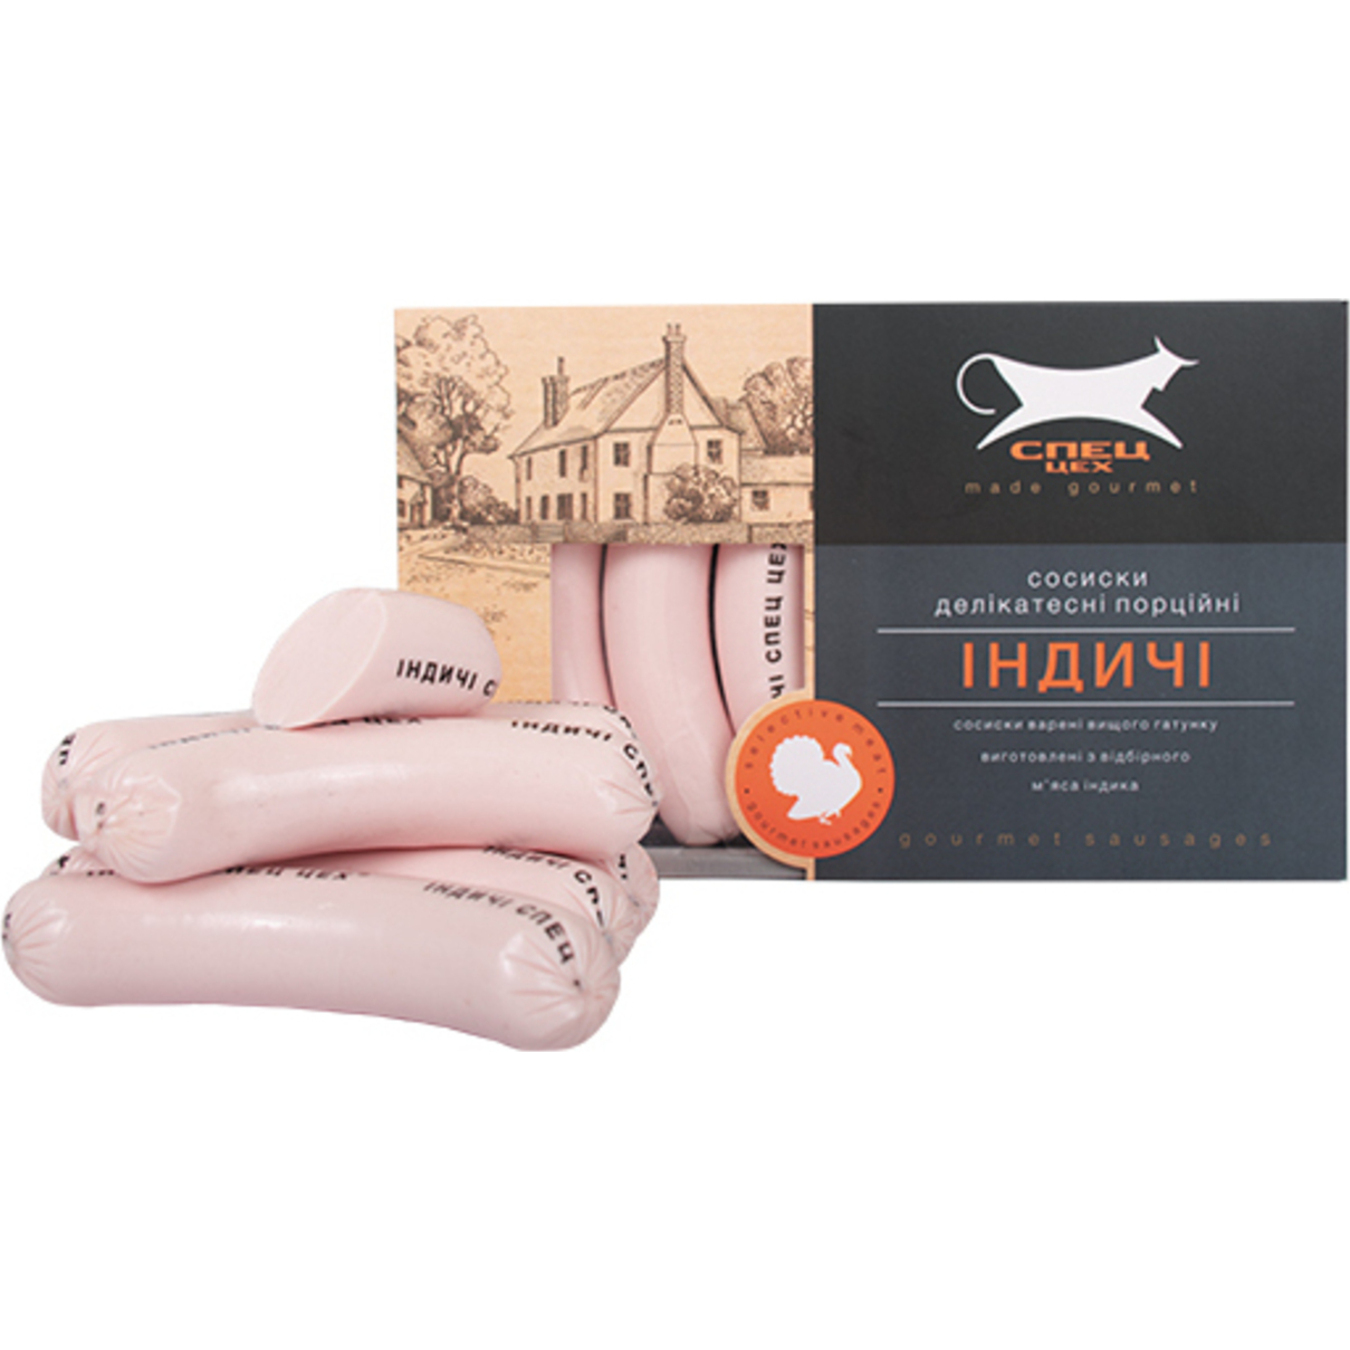 Spets-tseh turkey chilled sausages 600g